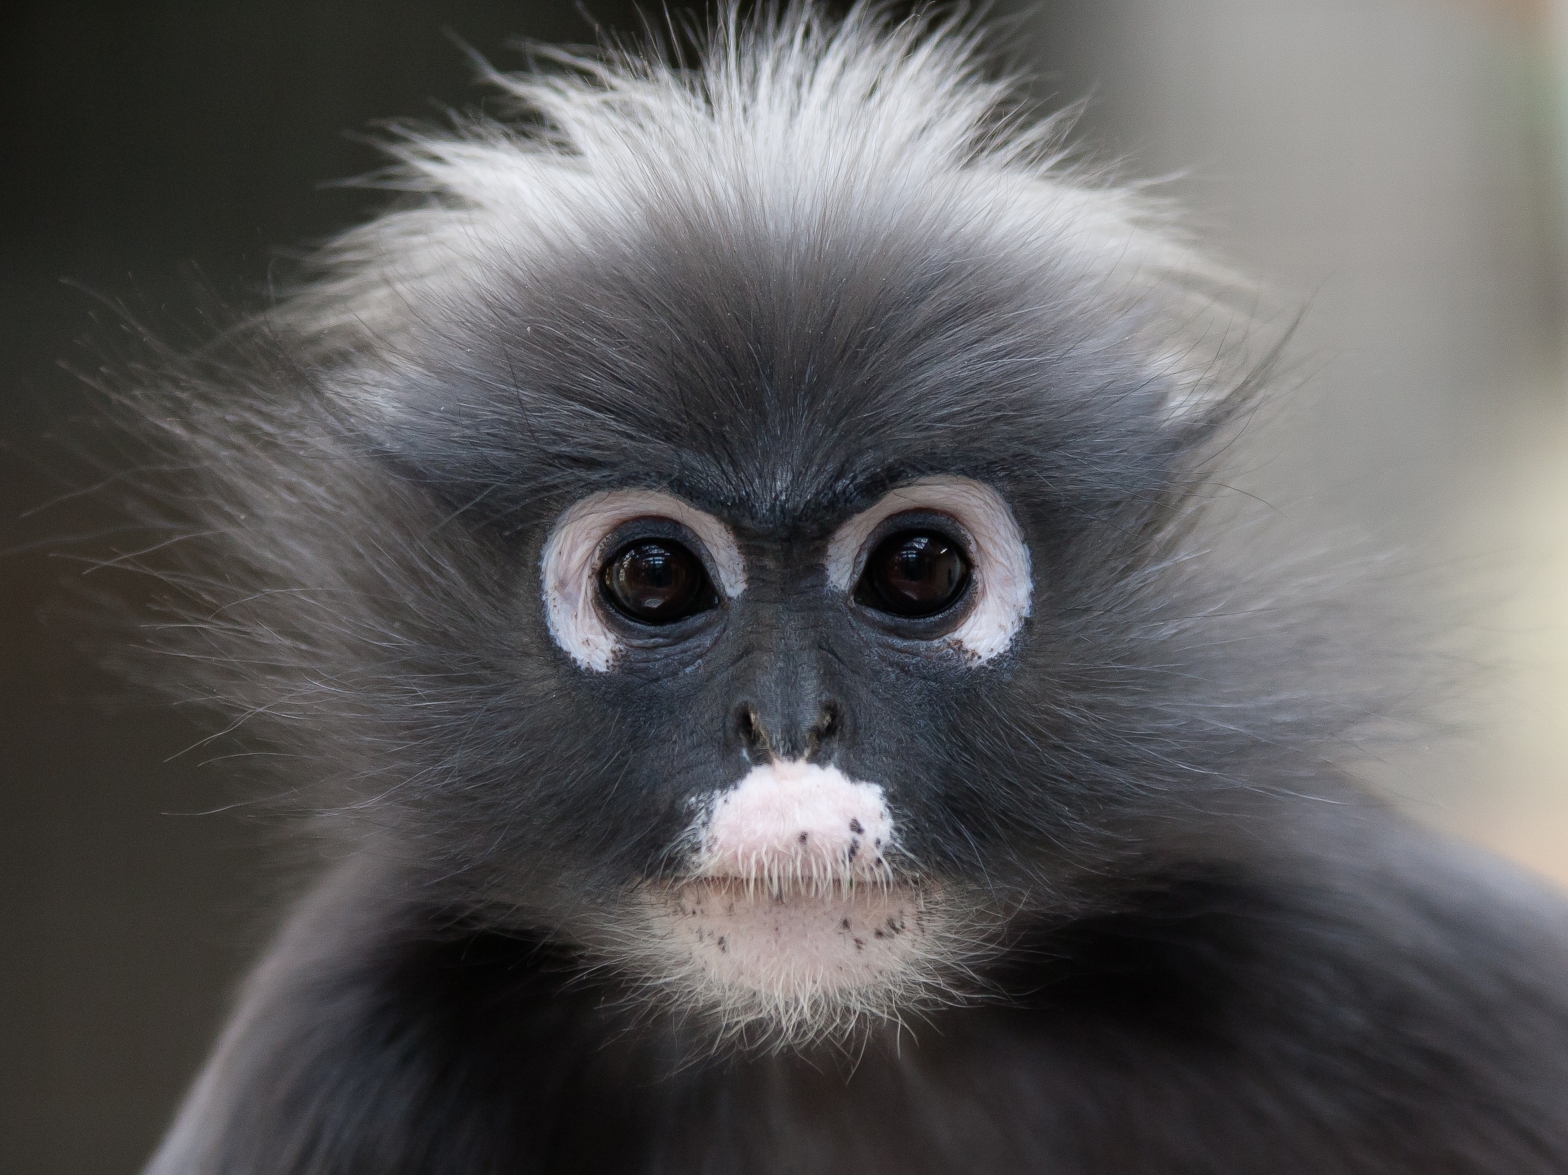 Dusky langurs—also known as spectacled langurs, dusky leaf monkeys, and spectacled leaf monkeys